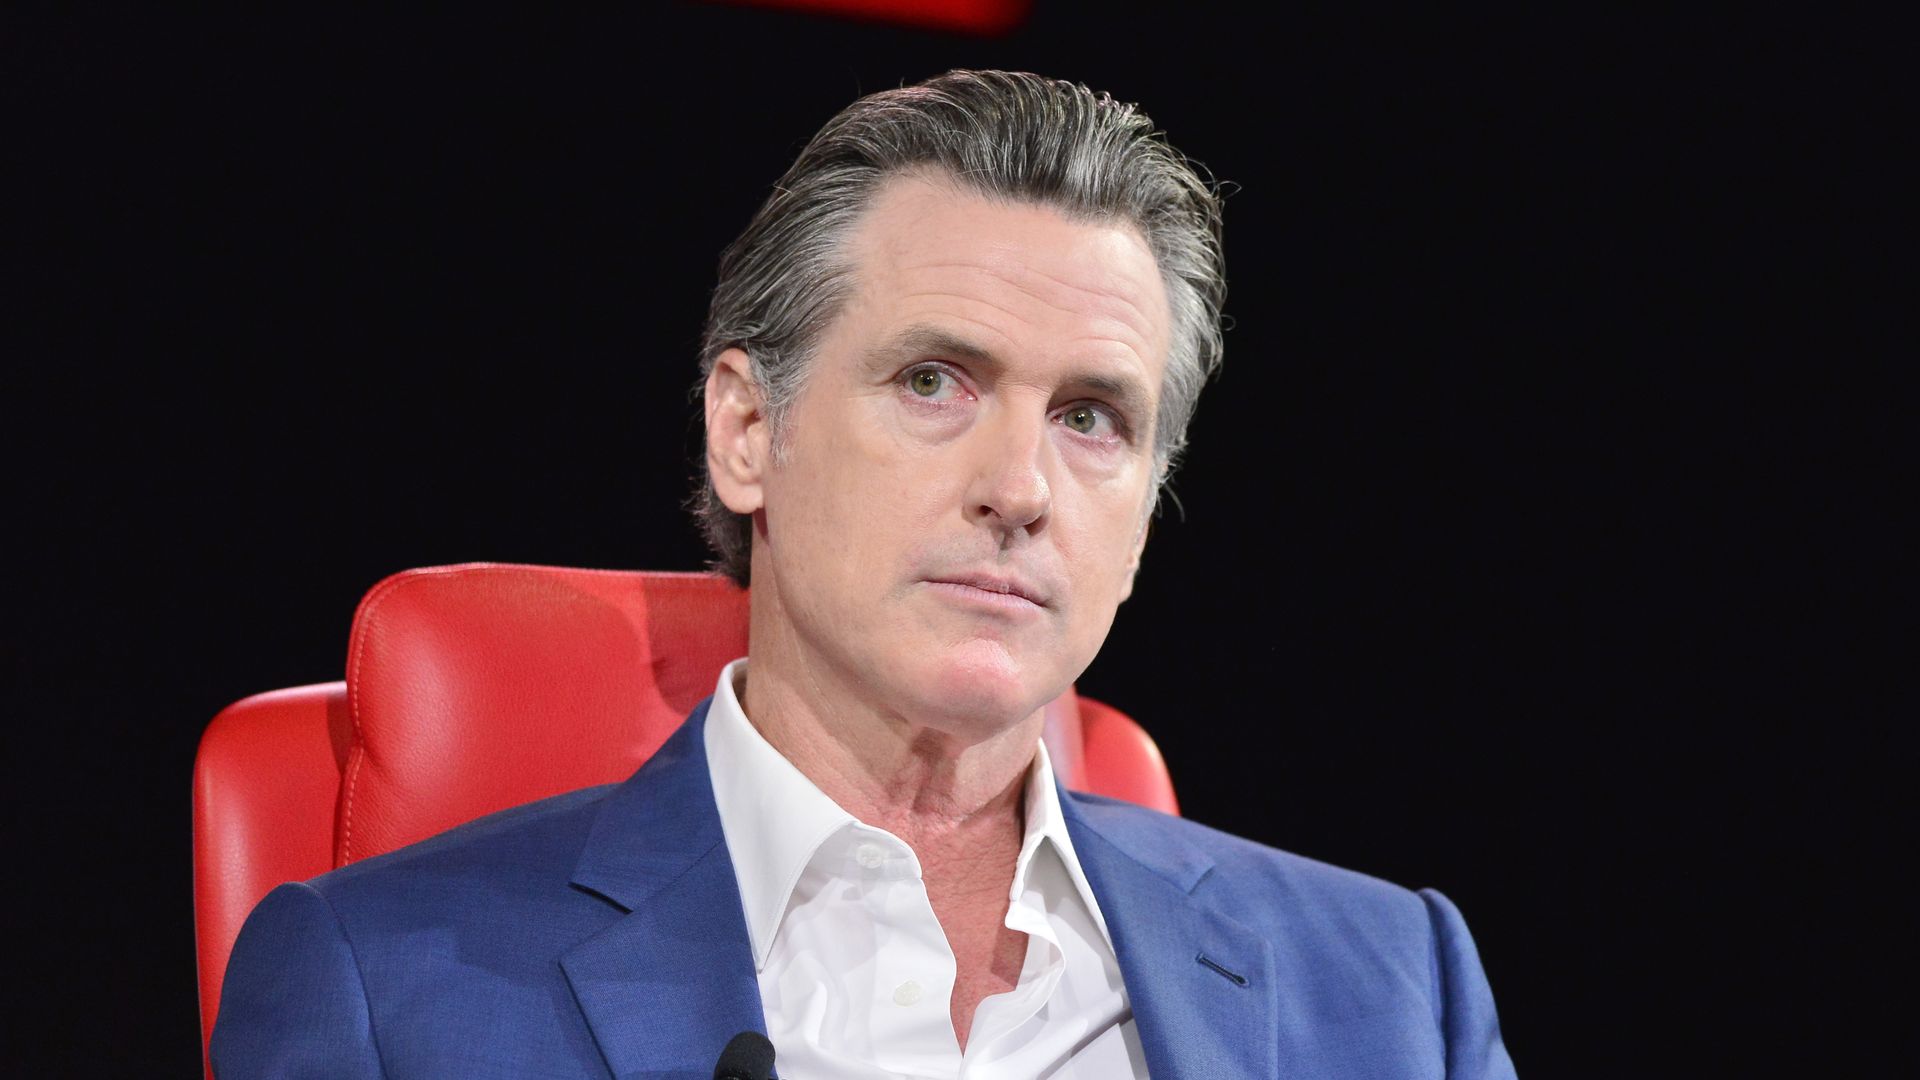 Photo of Gavin Newsom looking to his right as he sits in a red chair